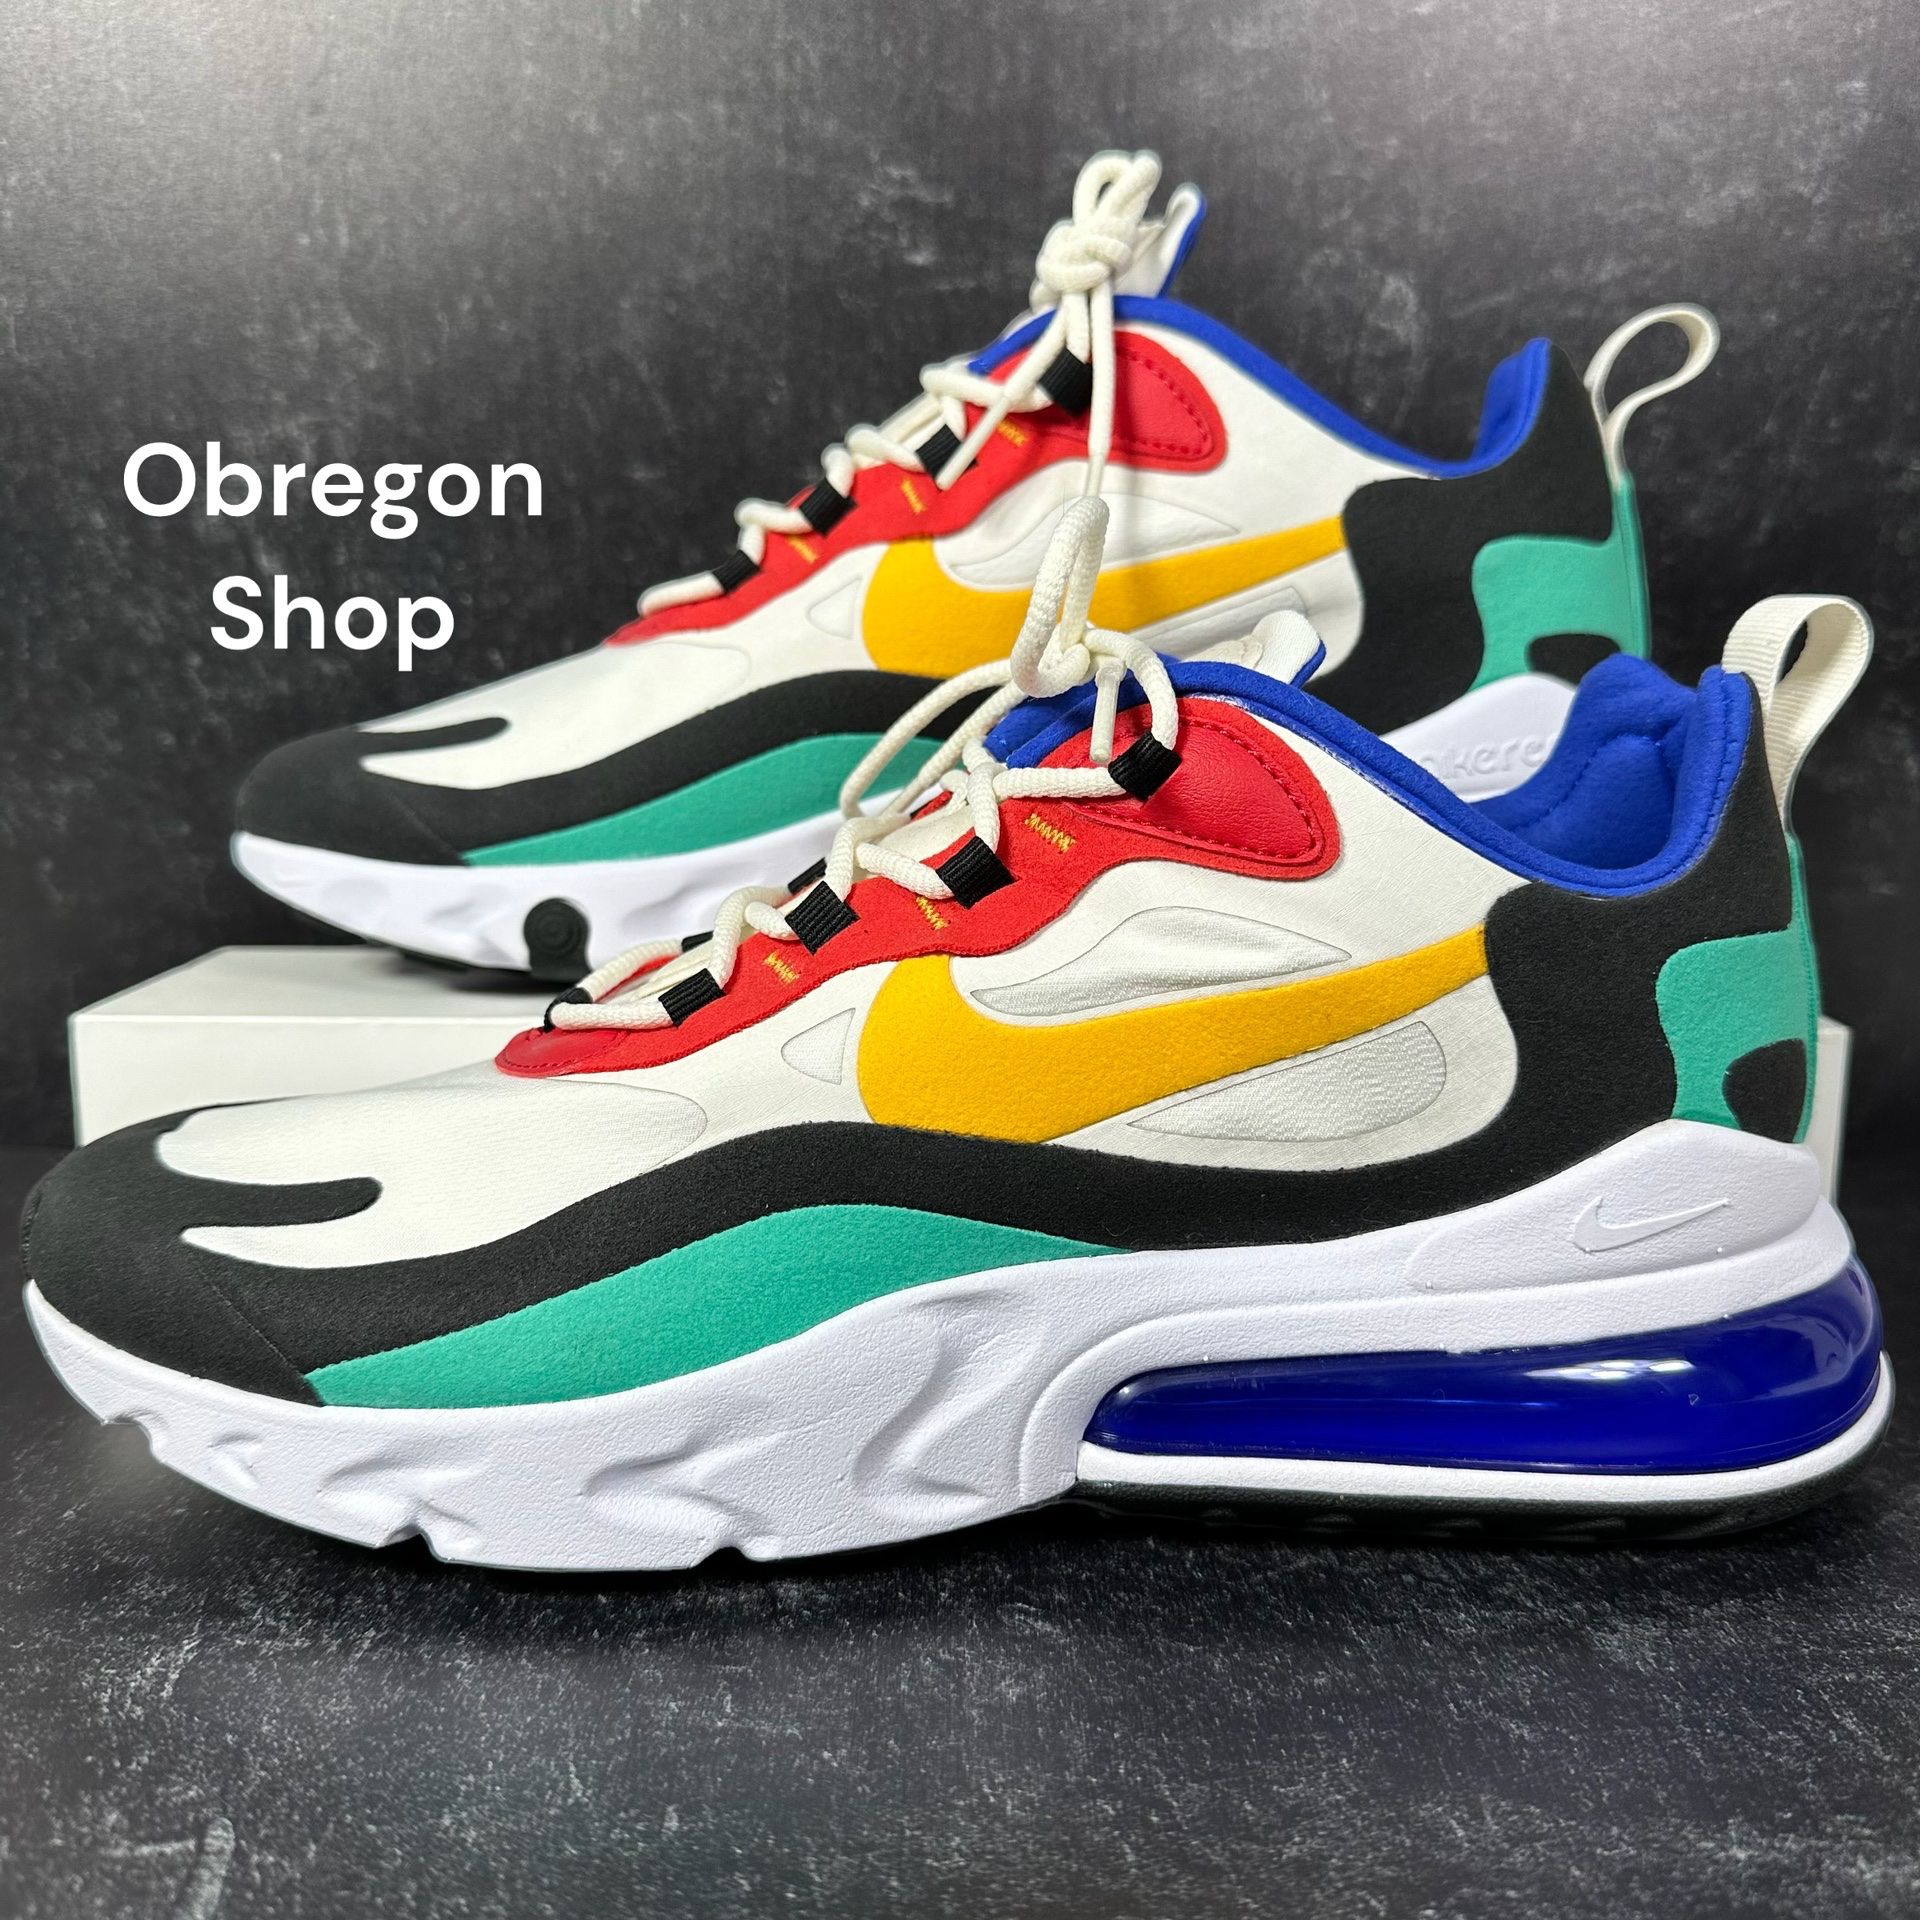 NIKE AIR MAX 270 REACT BAUHAUS MENS SHOES SIZE 9 WHITE RED YELLOW BLACK BLUE GREEN NEW Sale in TX OfferUp